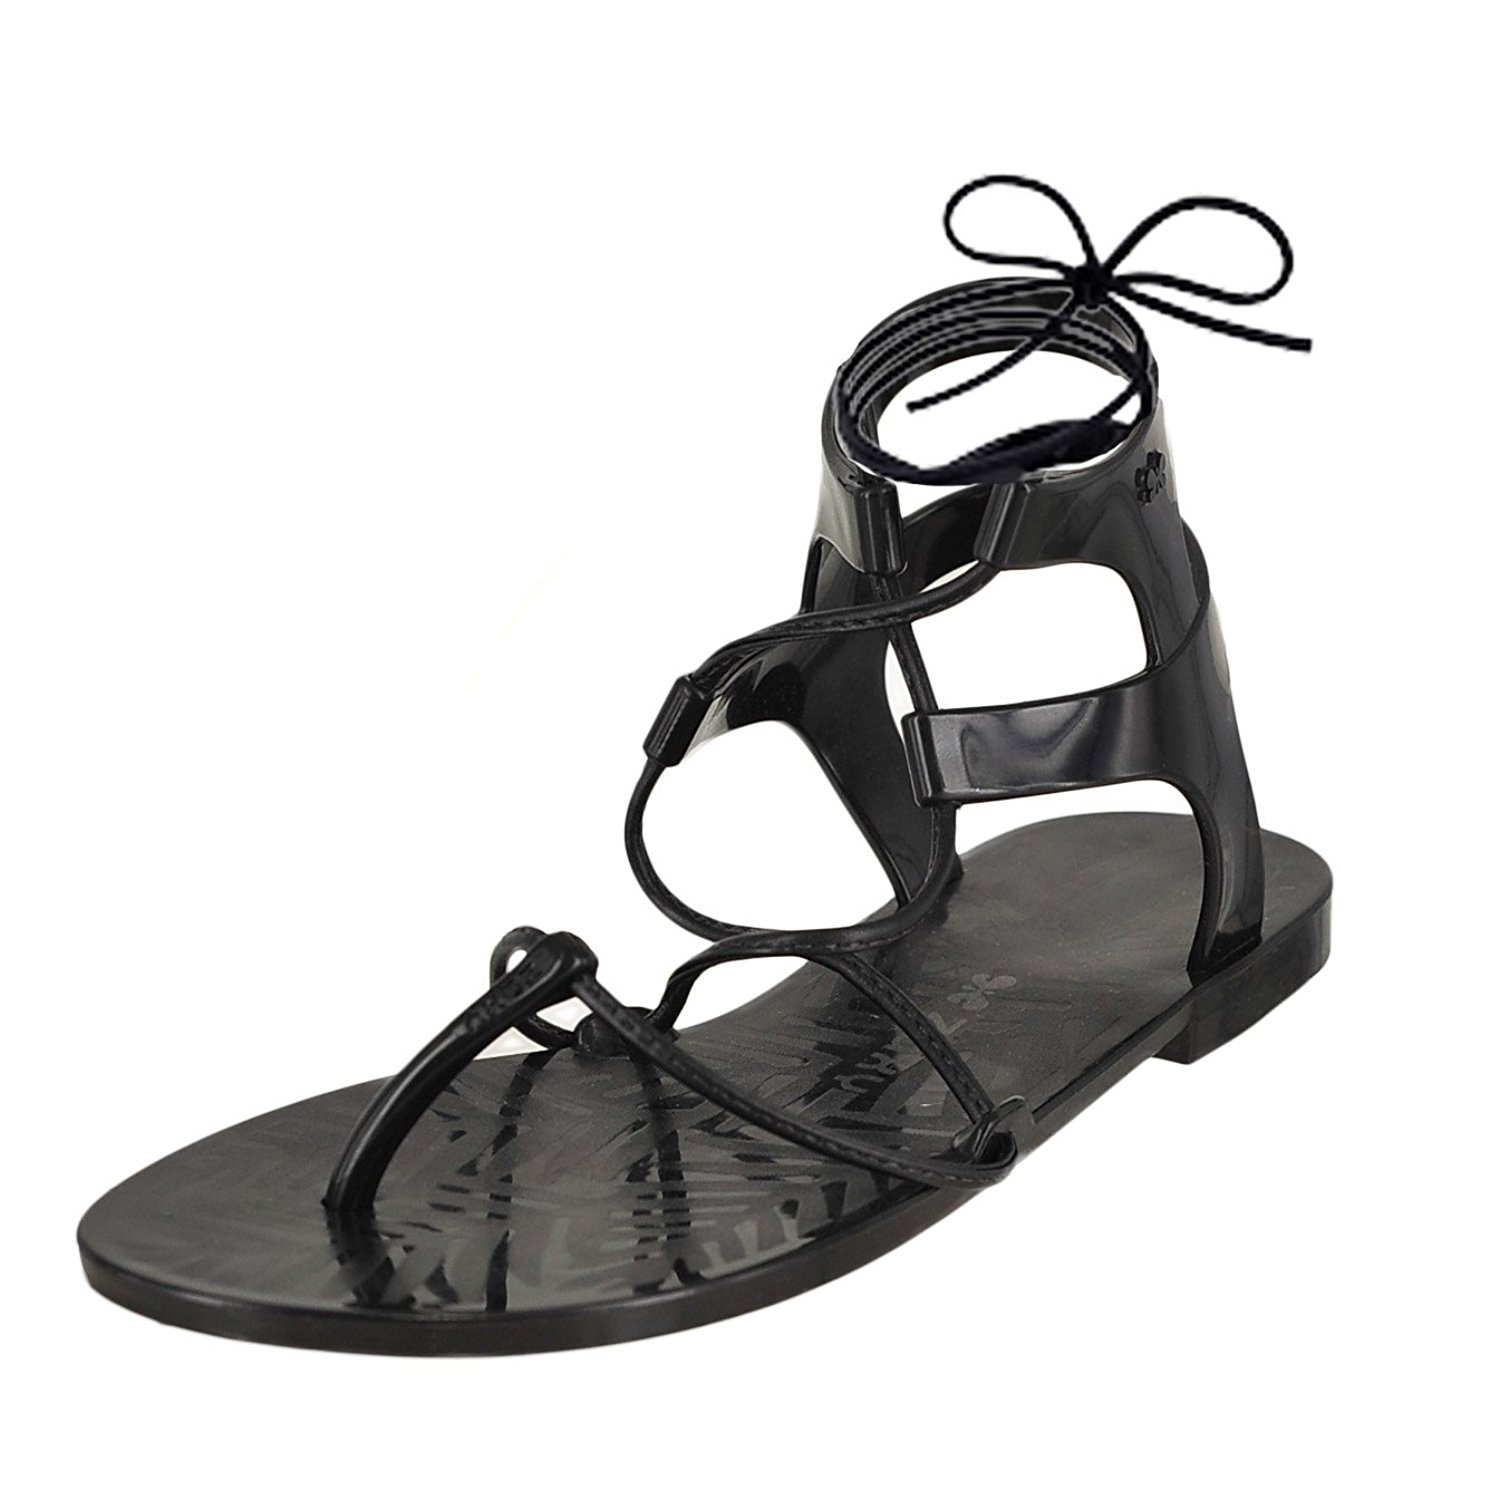 Amazing Travel Product: Jelly Sandals - Travel Love Fashion